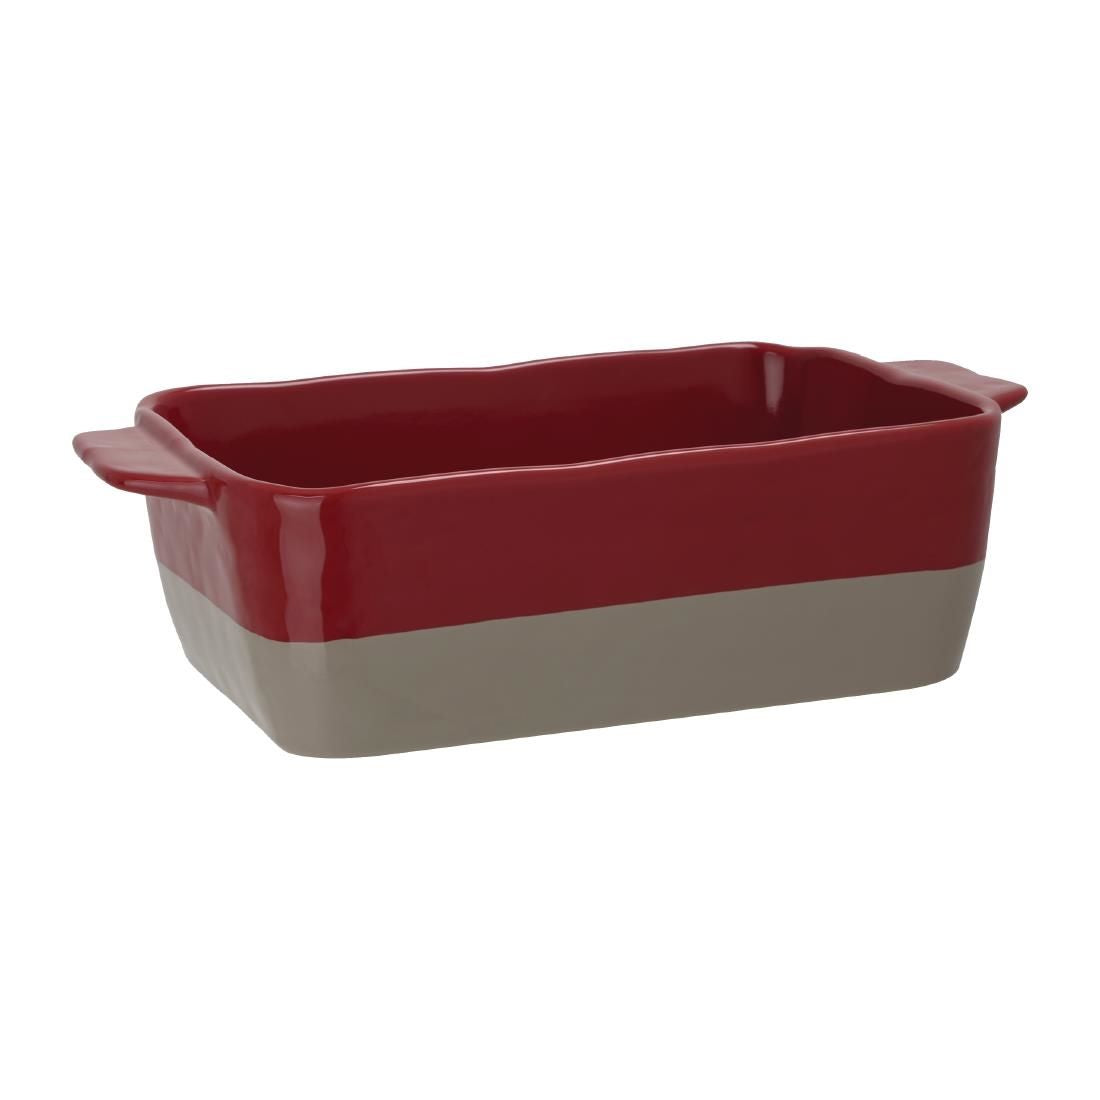 Olympia Red And Taupe Ceramic Roasting Dish - DB522 Dinnerware Olympia   